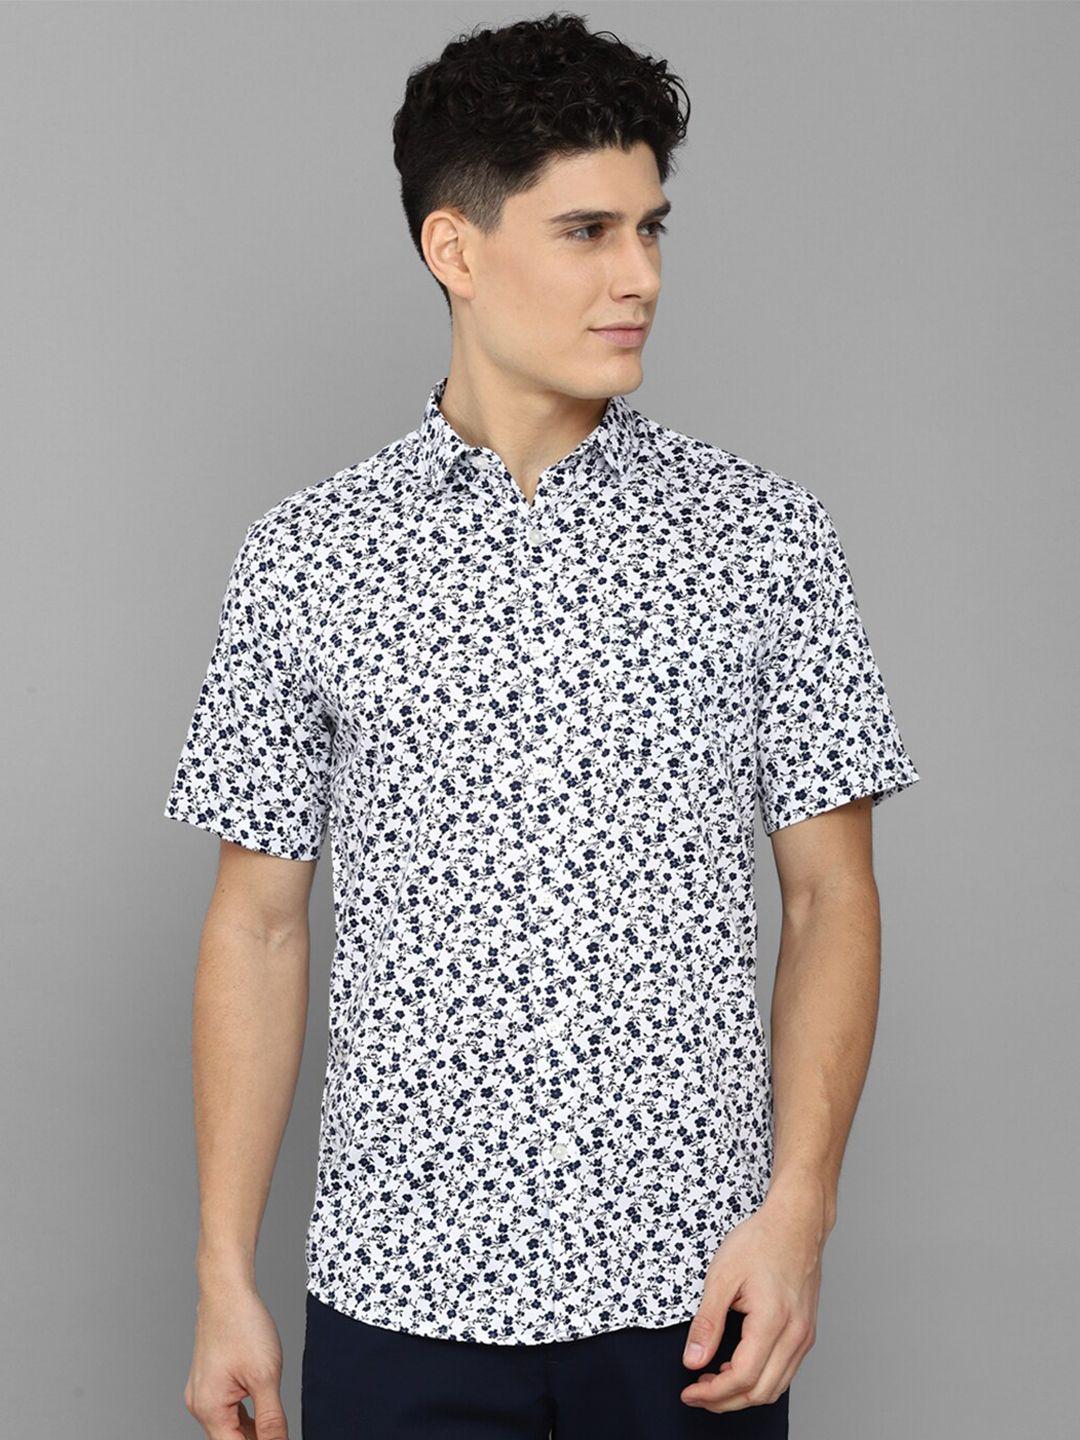 Allen Solly Men White Floral Printed Slim Fit Cotton Casual Shirt